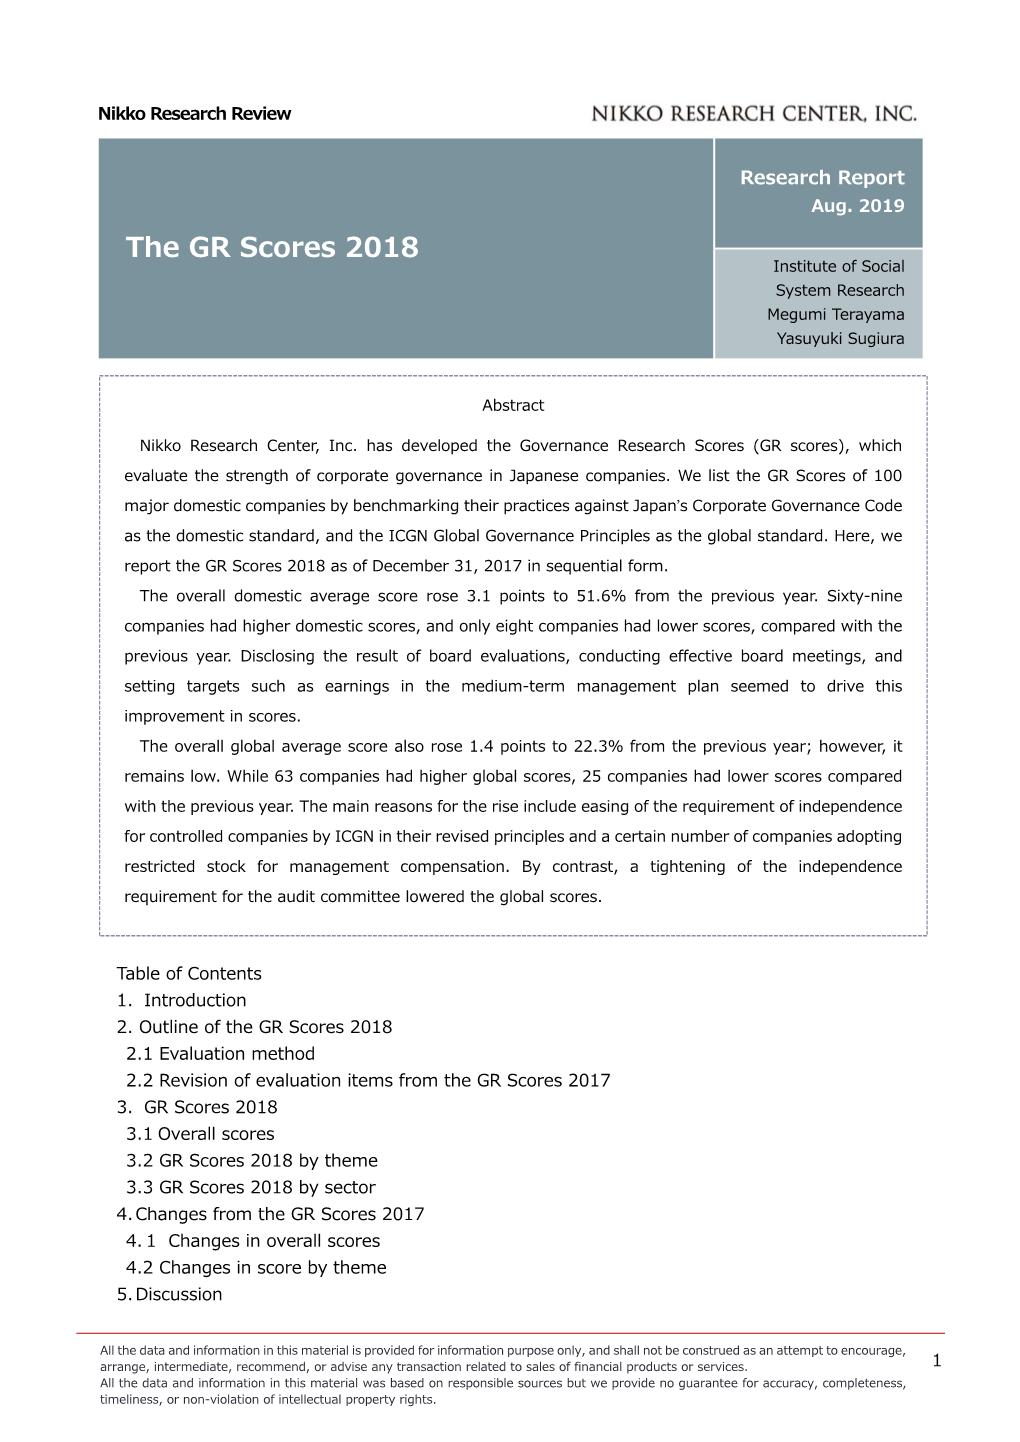 【Research Report】The GR Scores 2018